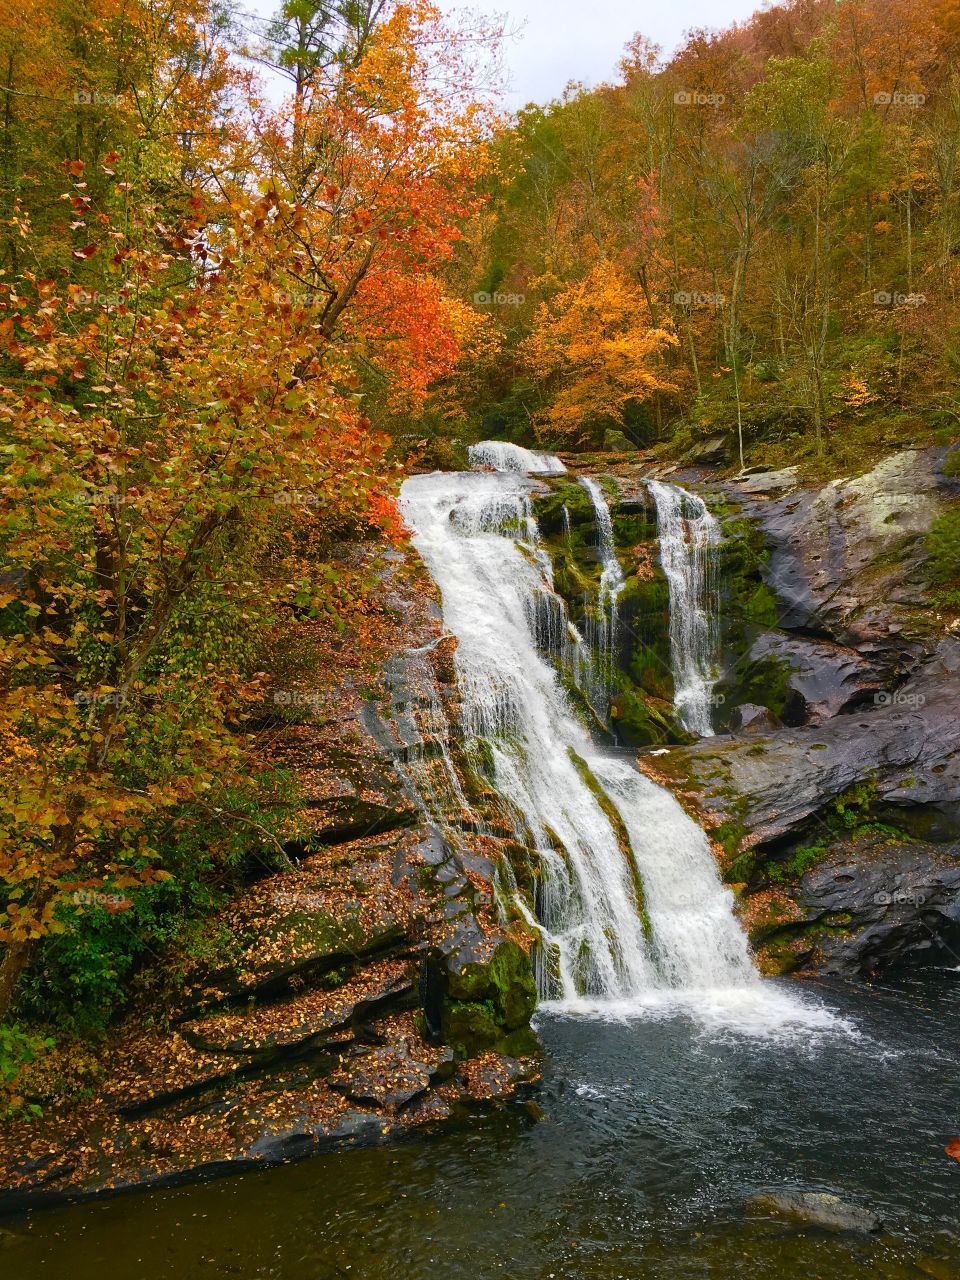 I've seen this water fall in all four seasons, fall is definitely my favorite. So damn beautiful. 